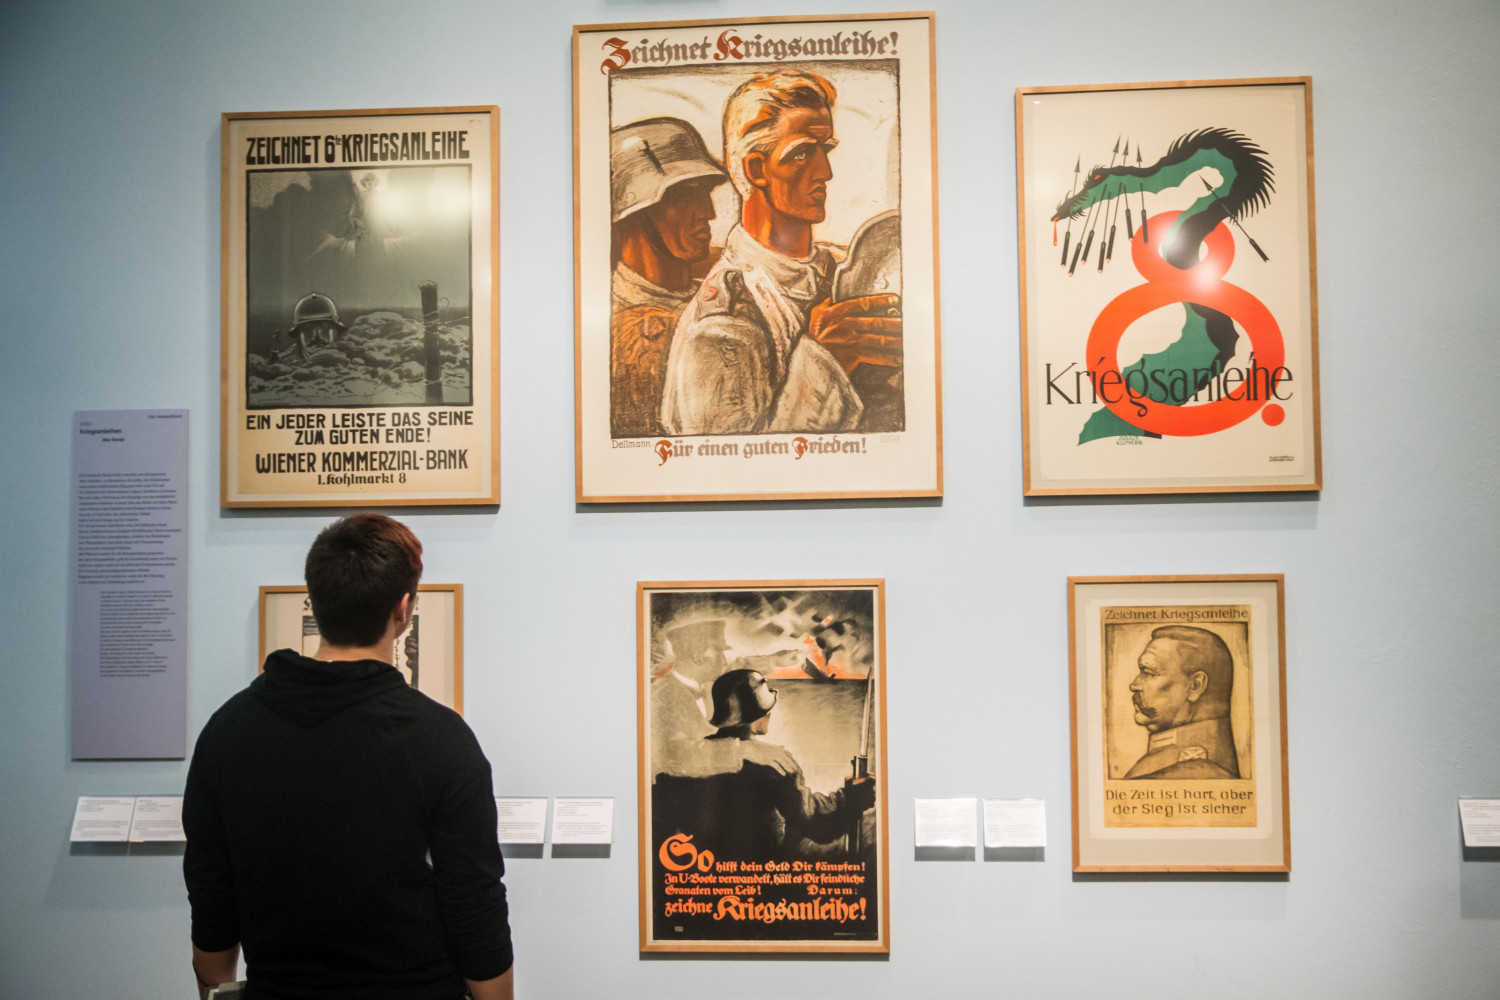 A student observes German military posters in a museum on the J-Term study tour to Germany.